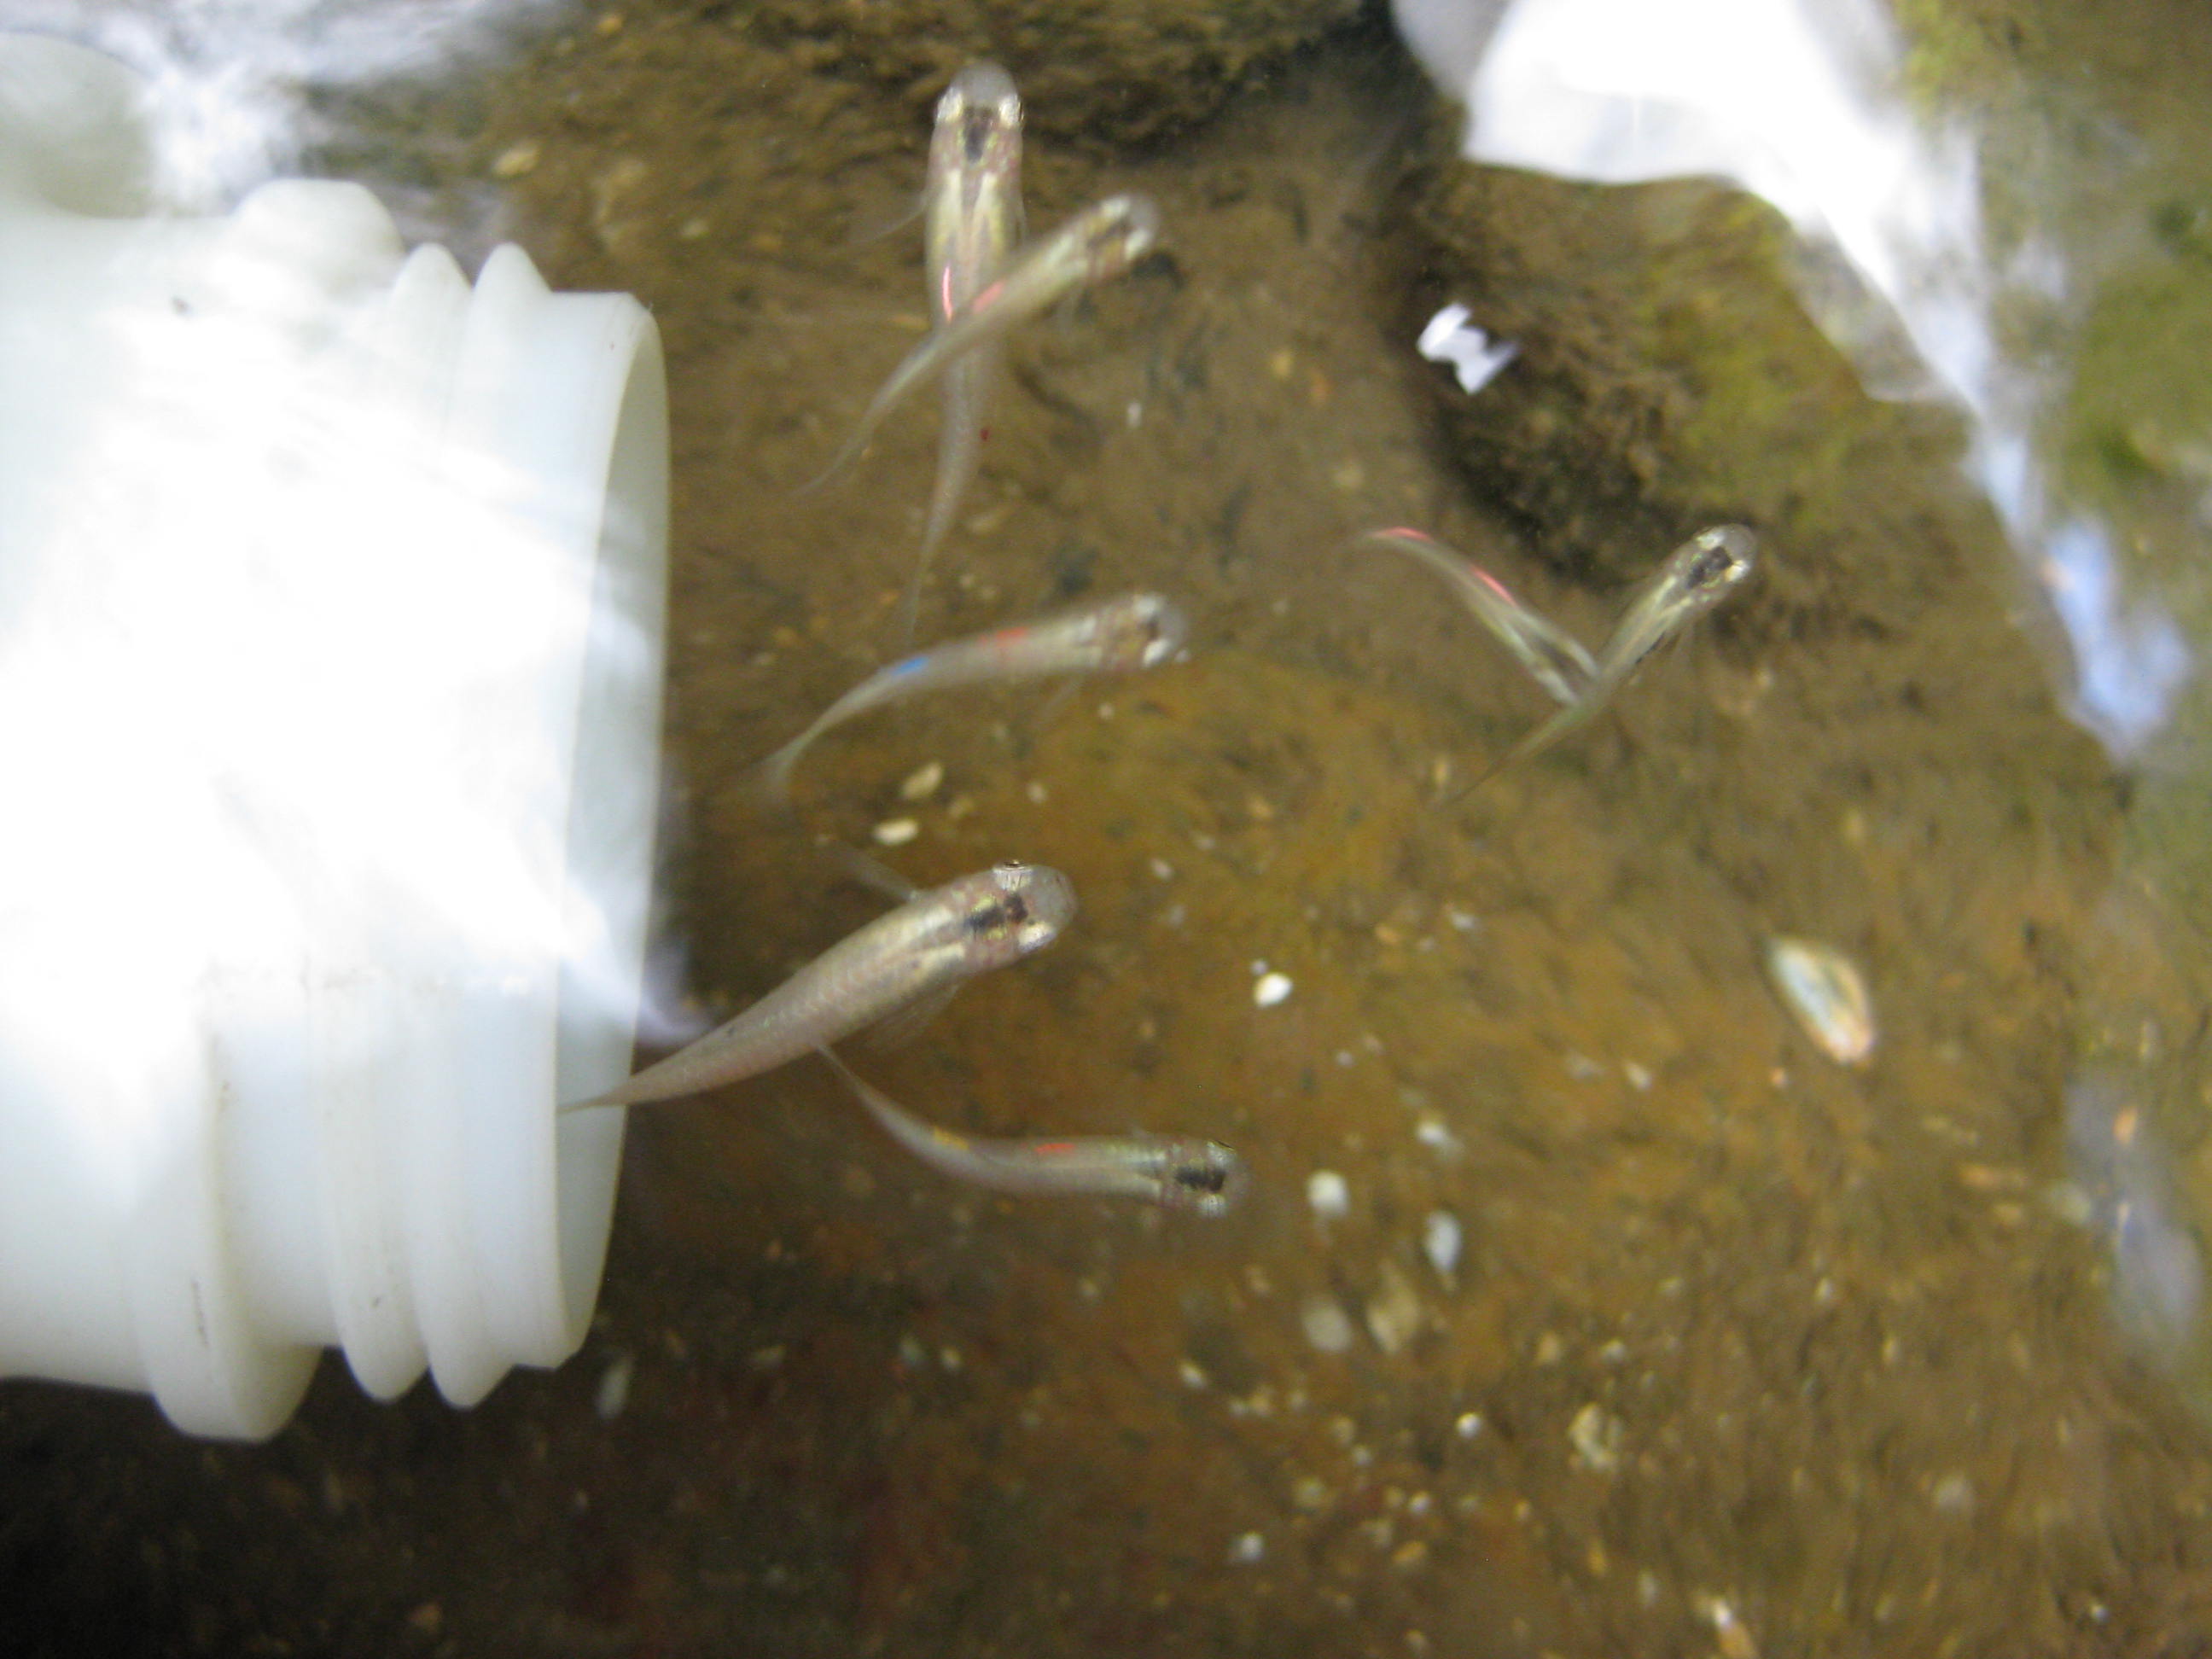 A photograph looks down at a white jar in a stream about to catch several guppies.